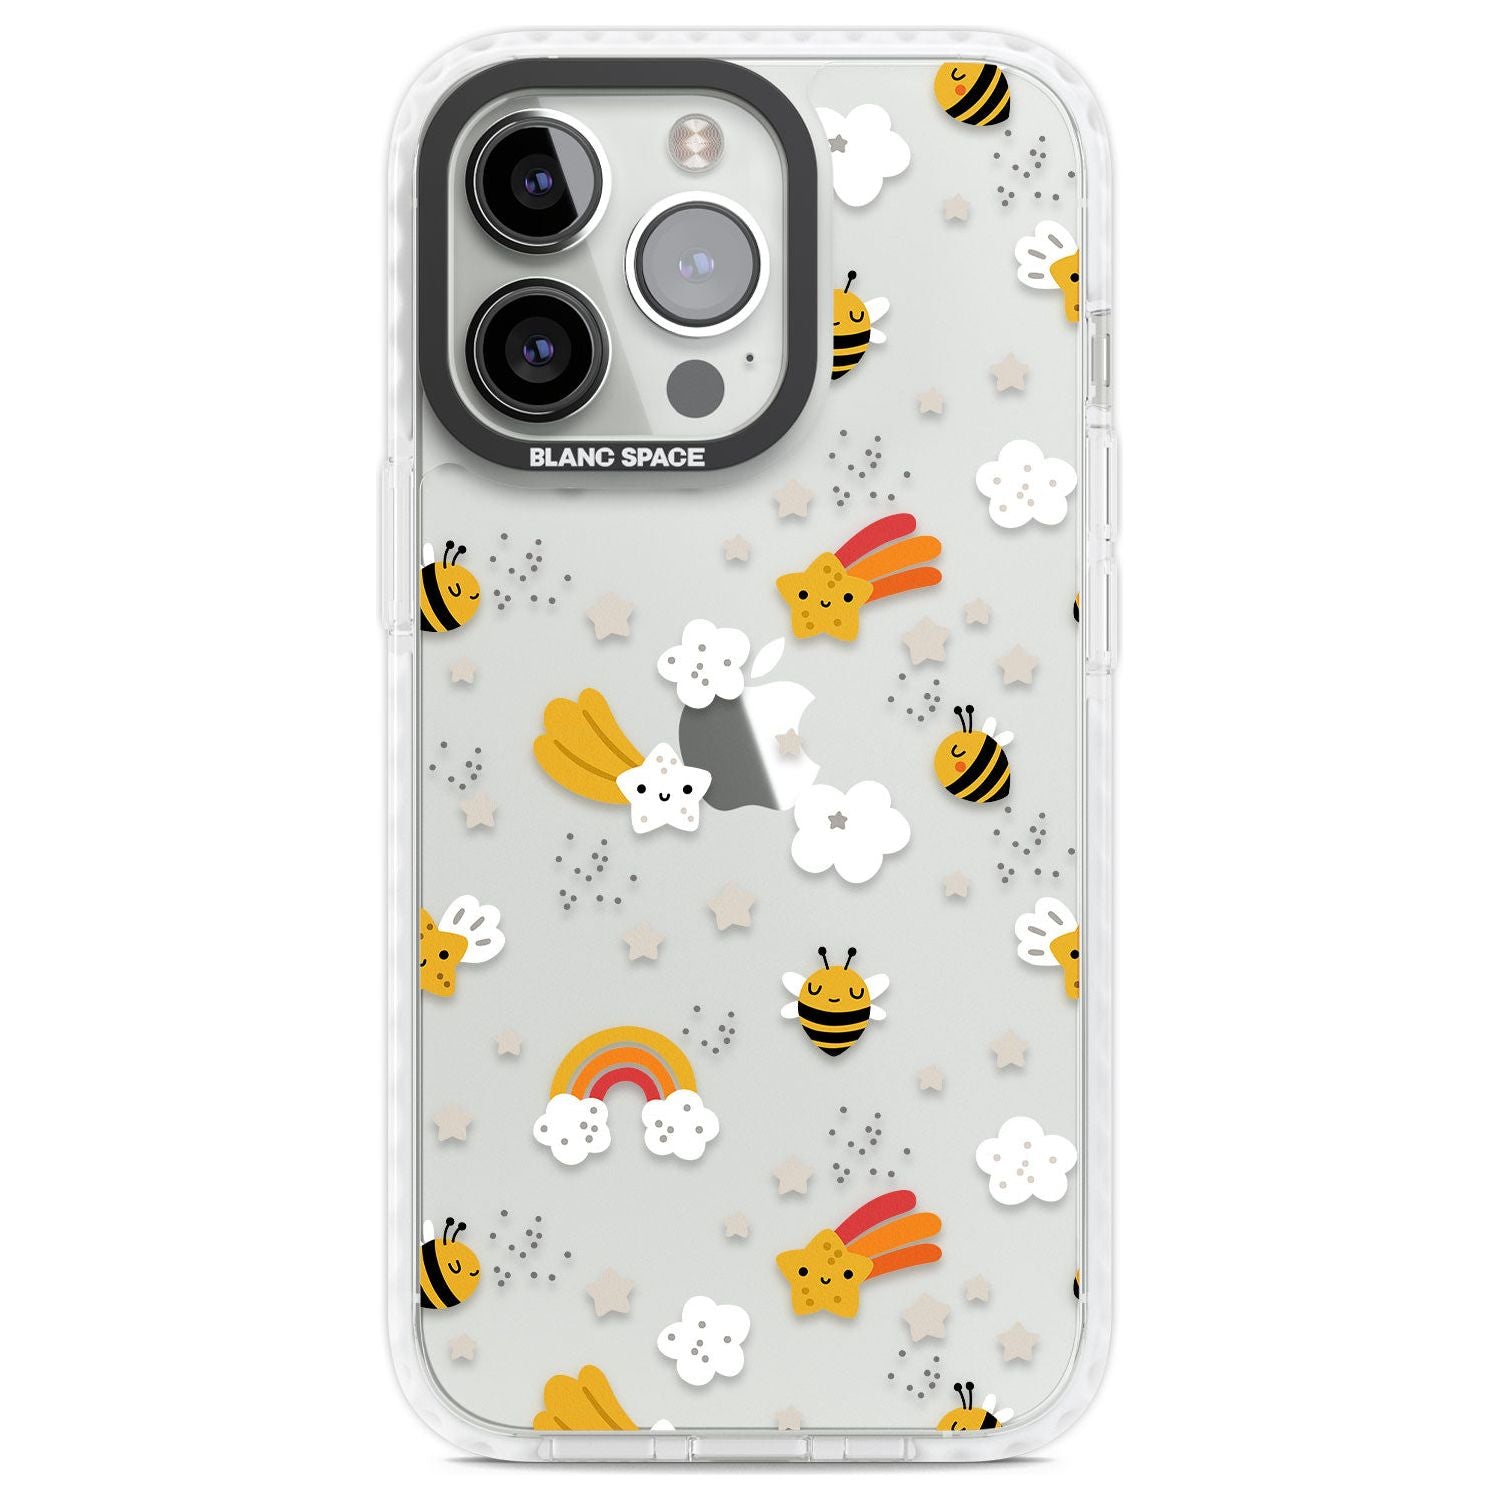 Busy Bee Phone Case iPhone 13 Pro / Impact Case,iPhone 14 Pro / Impact Case,iPhone 15 Pro Max / Impact Case,iPhone 15 Pro / Impact Case Blanc Space